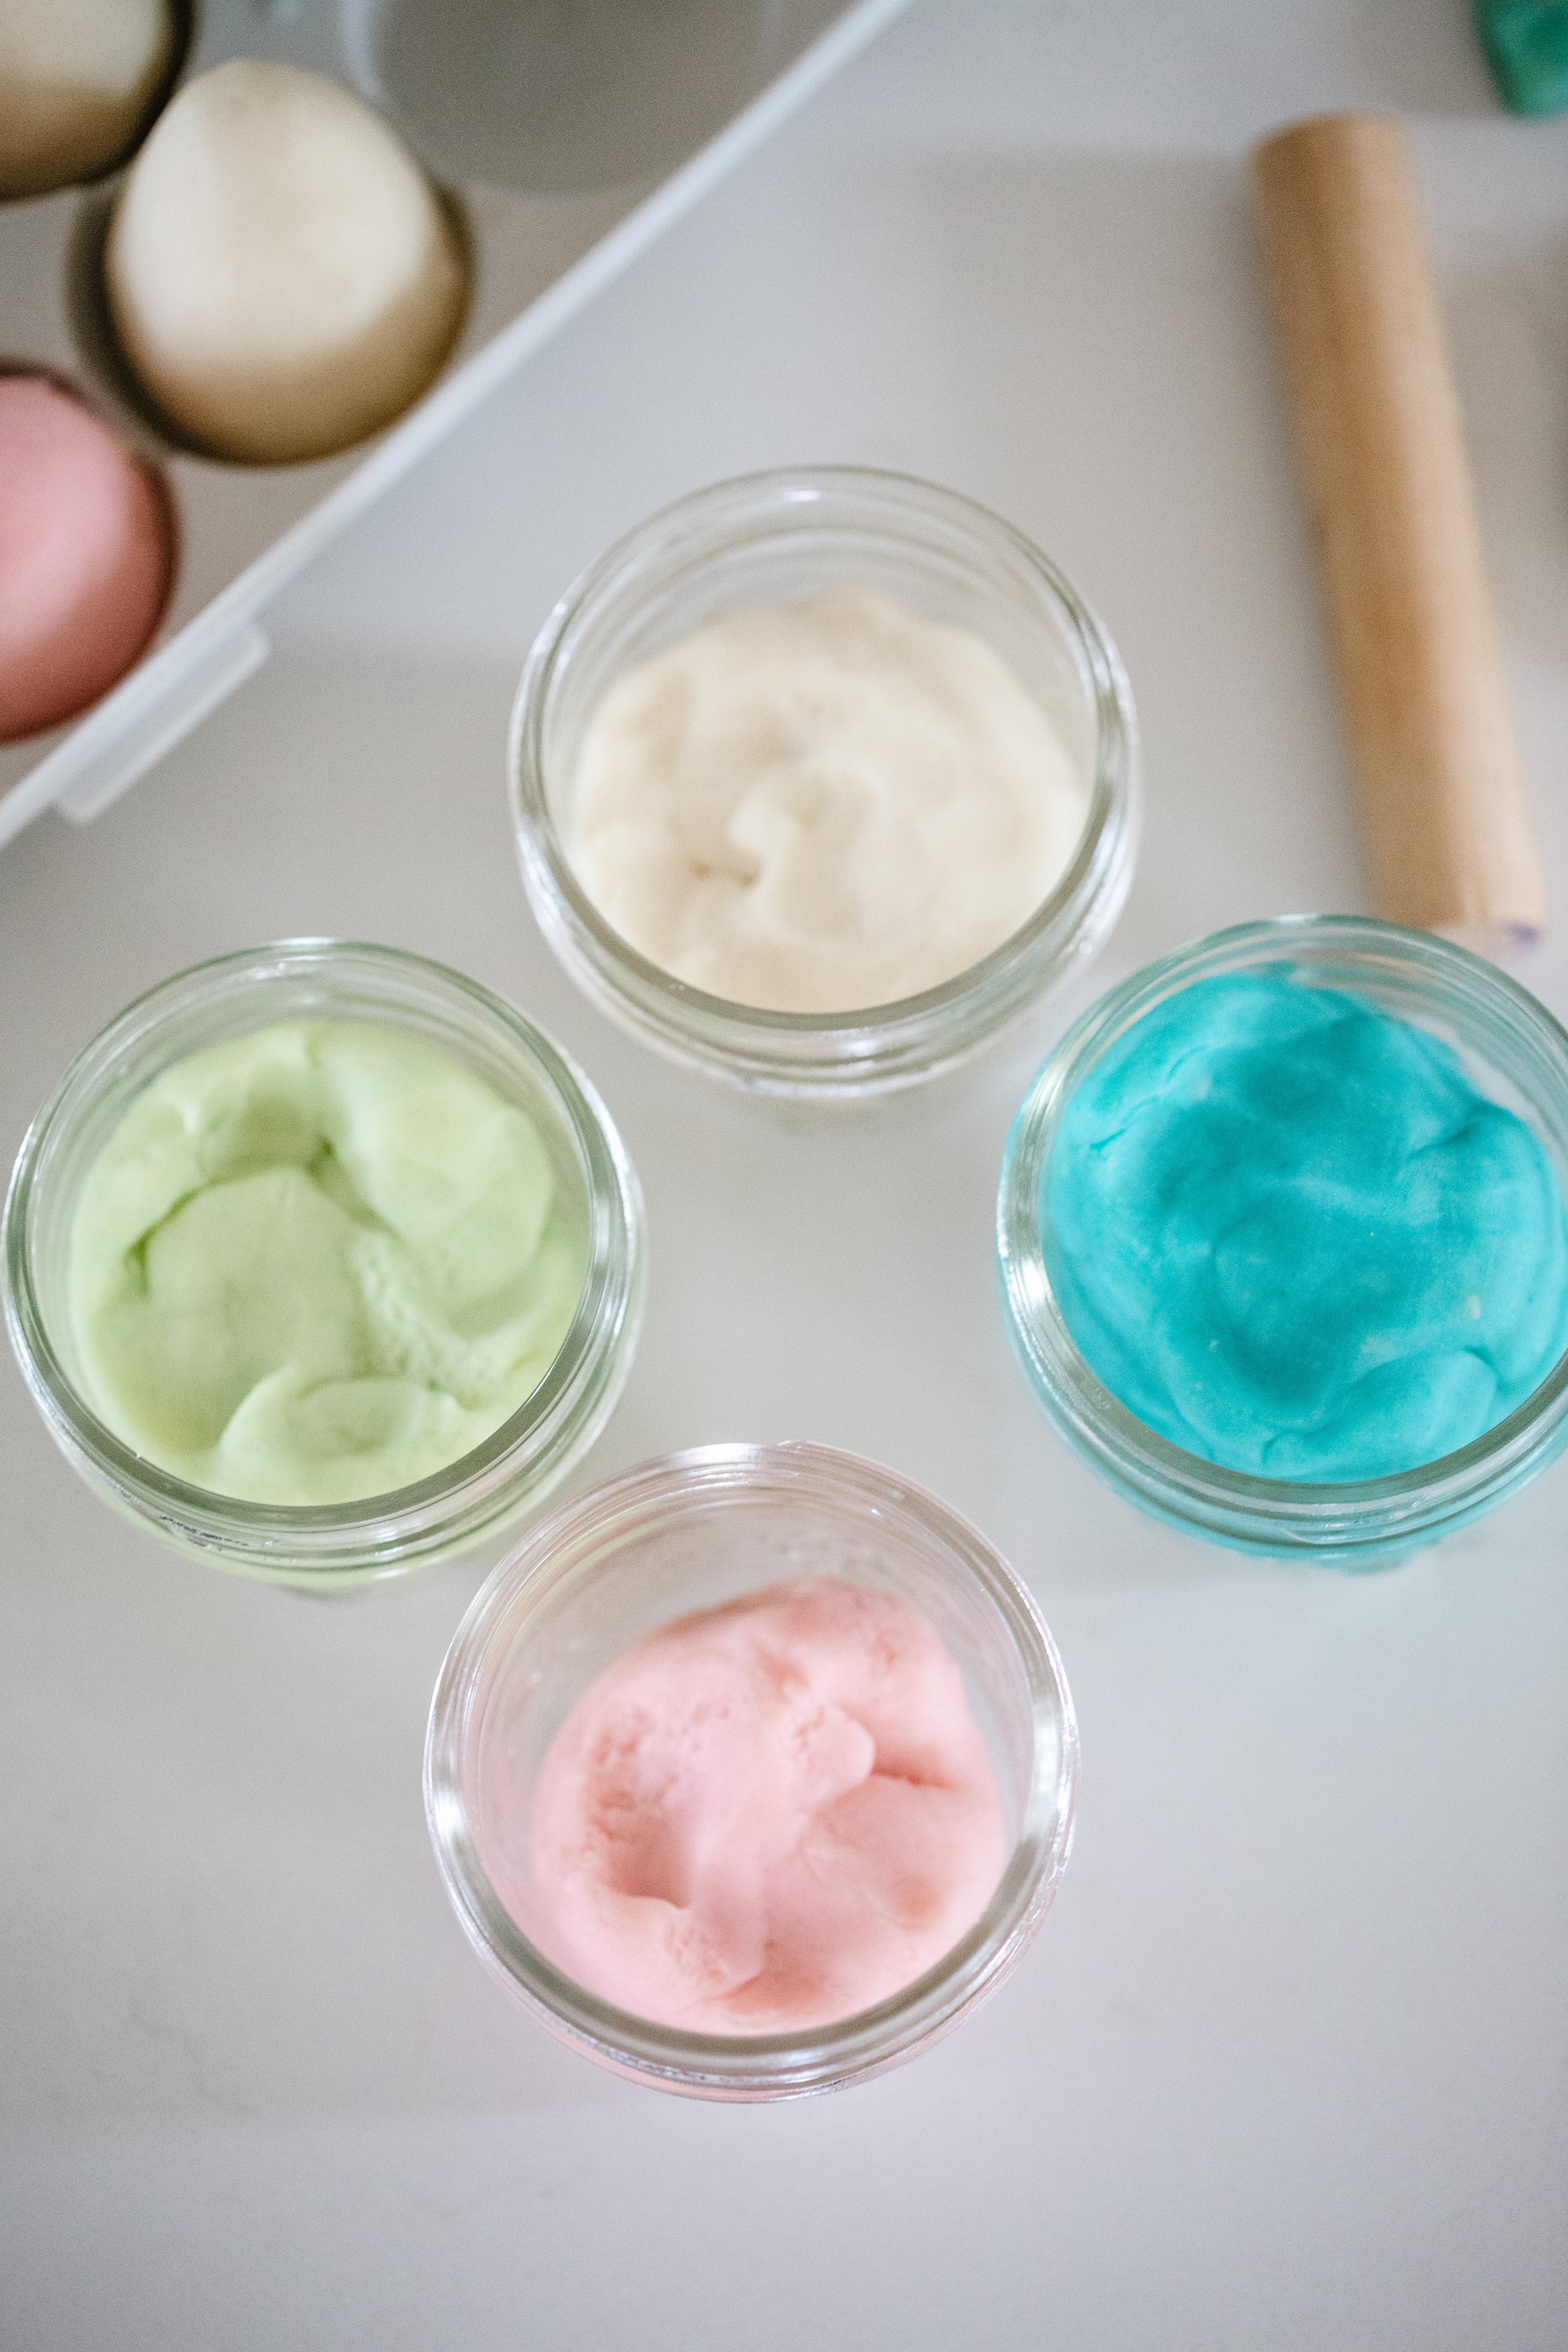 How To Make Non-Toxic Playdough For Your Baby?